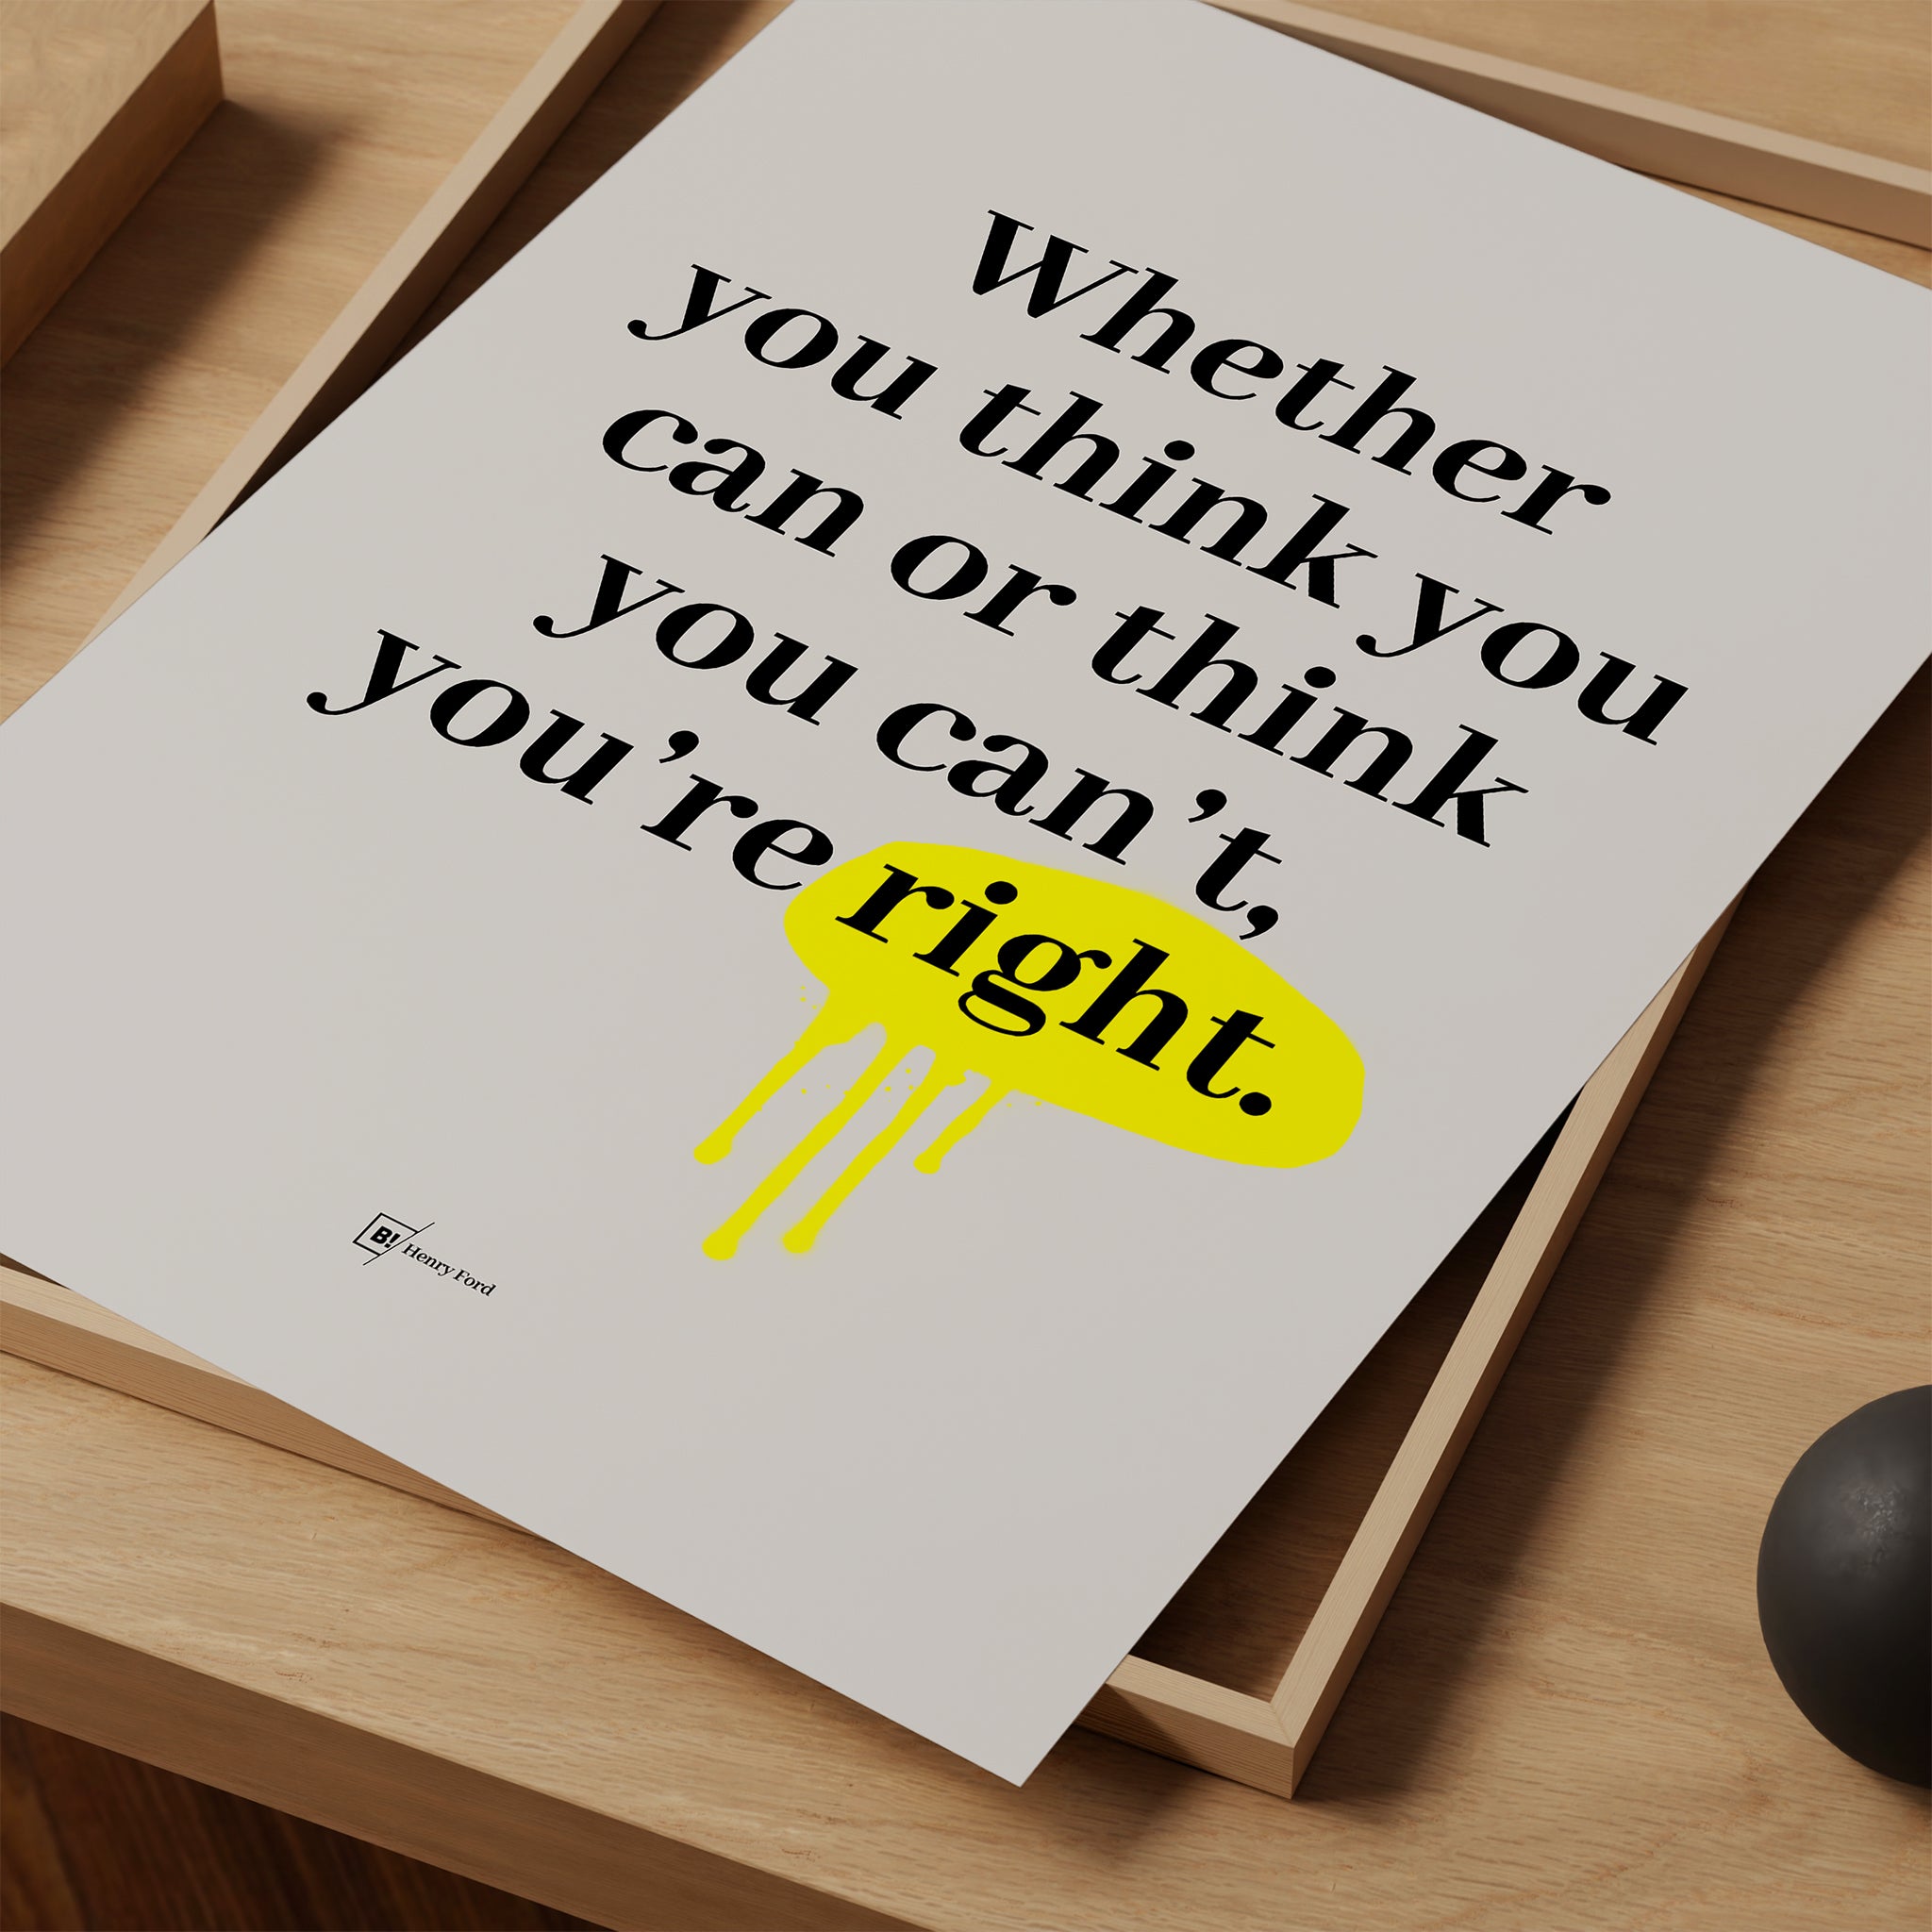 Be inspired by Henry Ford's famous "Whether you think you can or think you can't, you're right" quote art print. This artwork was printed using giclée on archival acid-free paper and is presented as a print close-up that captures its timeless beauty in every detail.